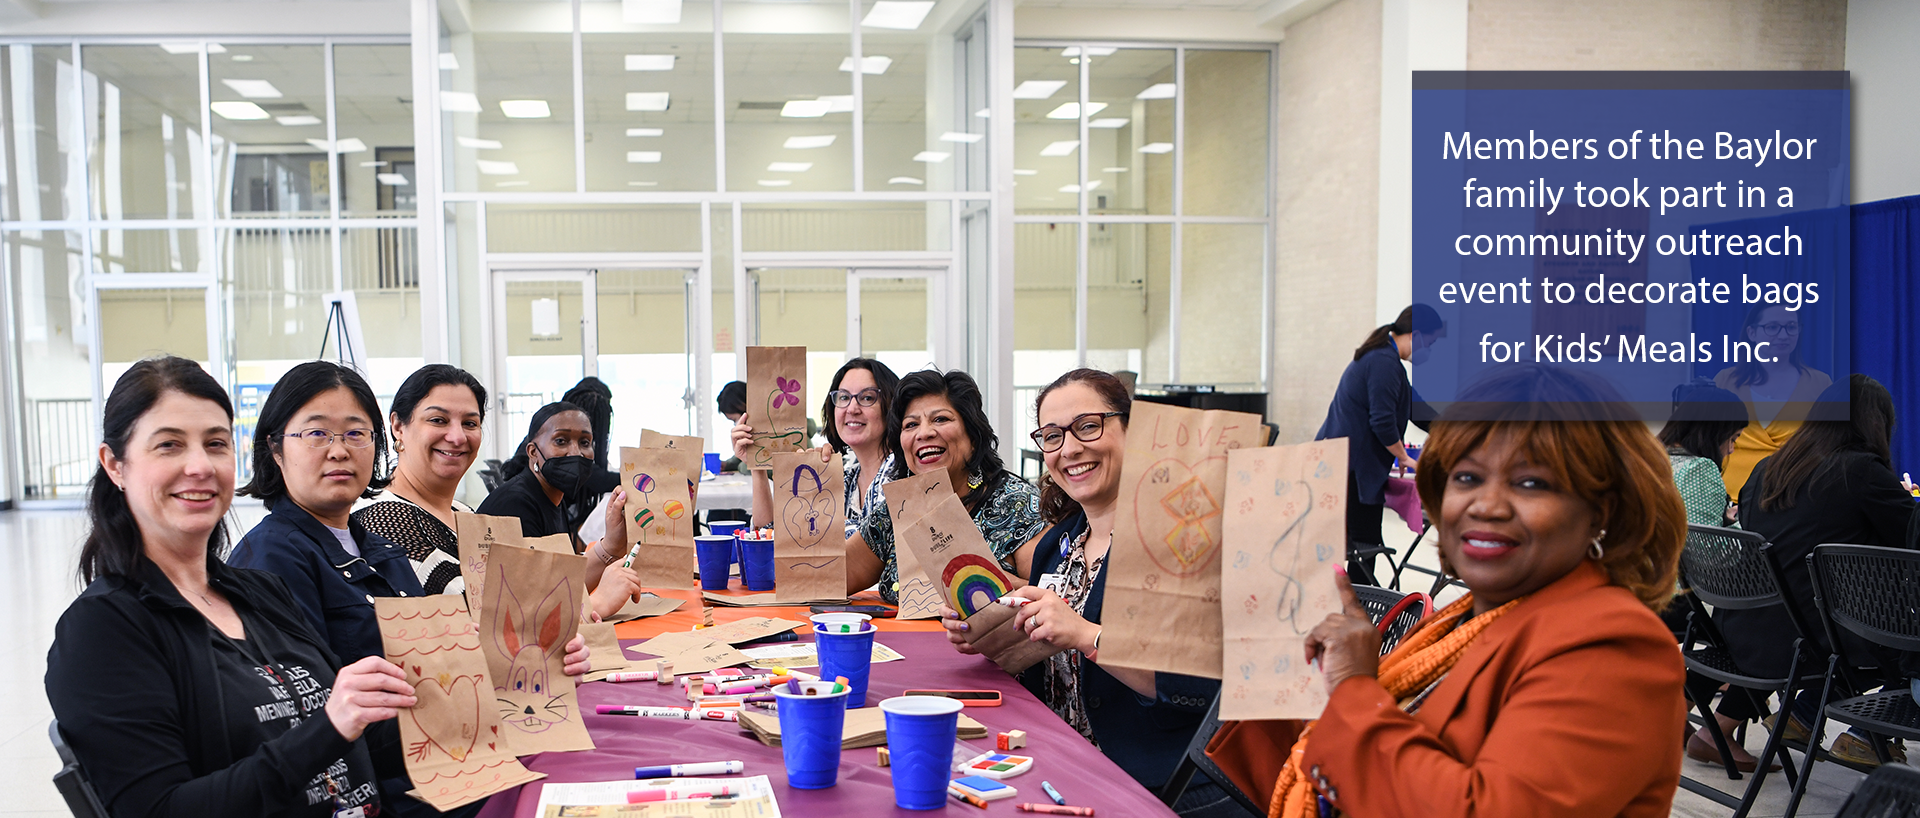 Members of the Baylor family took part in a community outreach event to decorate bags for Kids' Meals Inc. 